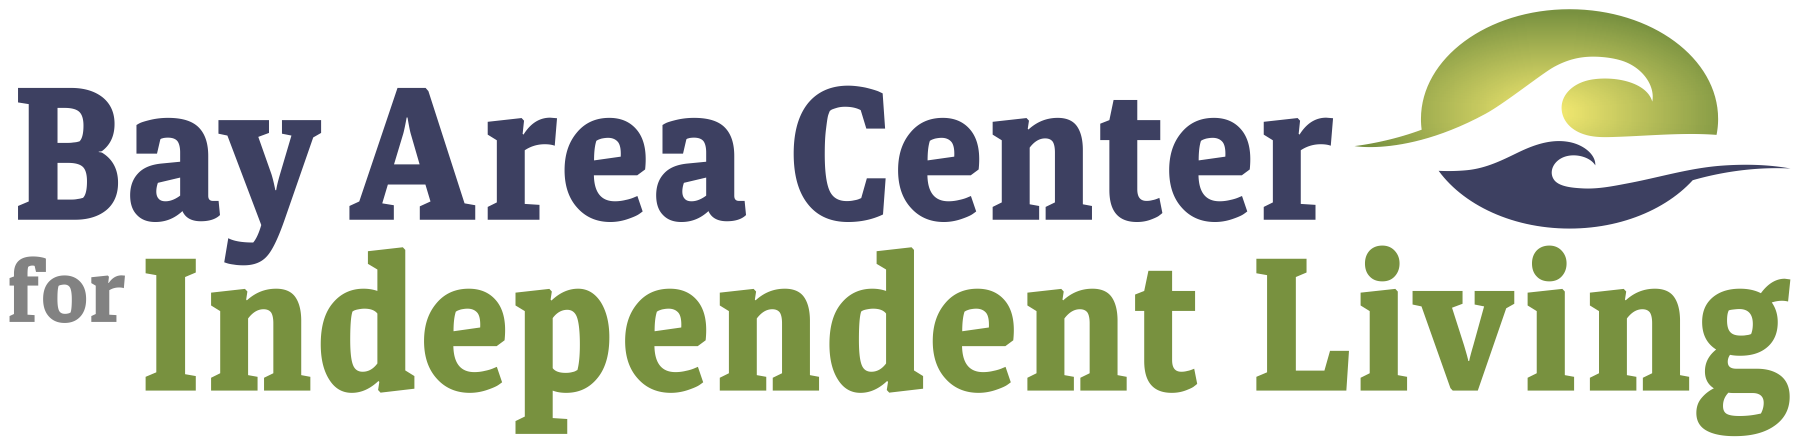 Bay Area Center for Independent Living